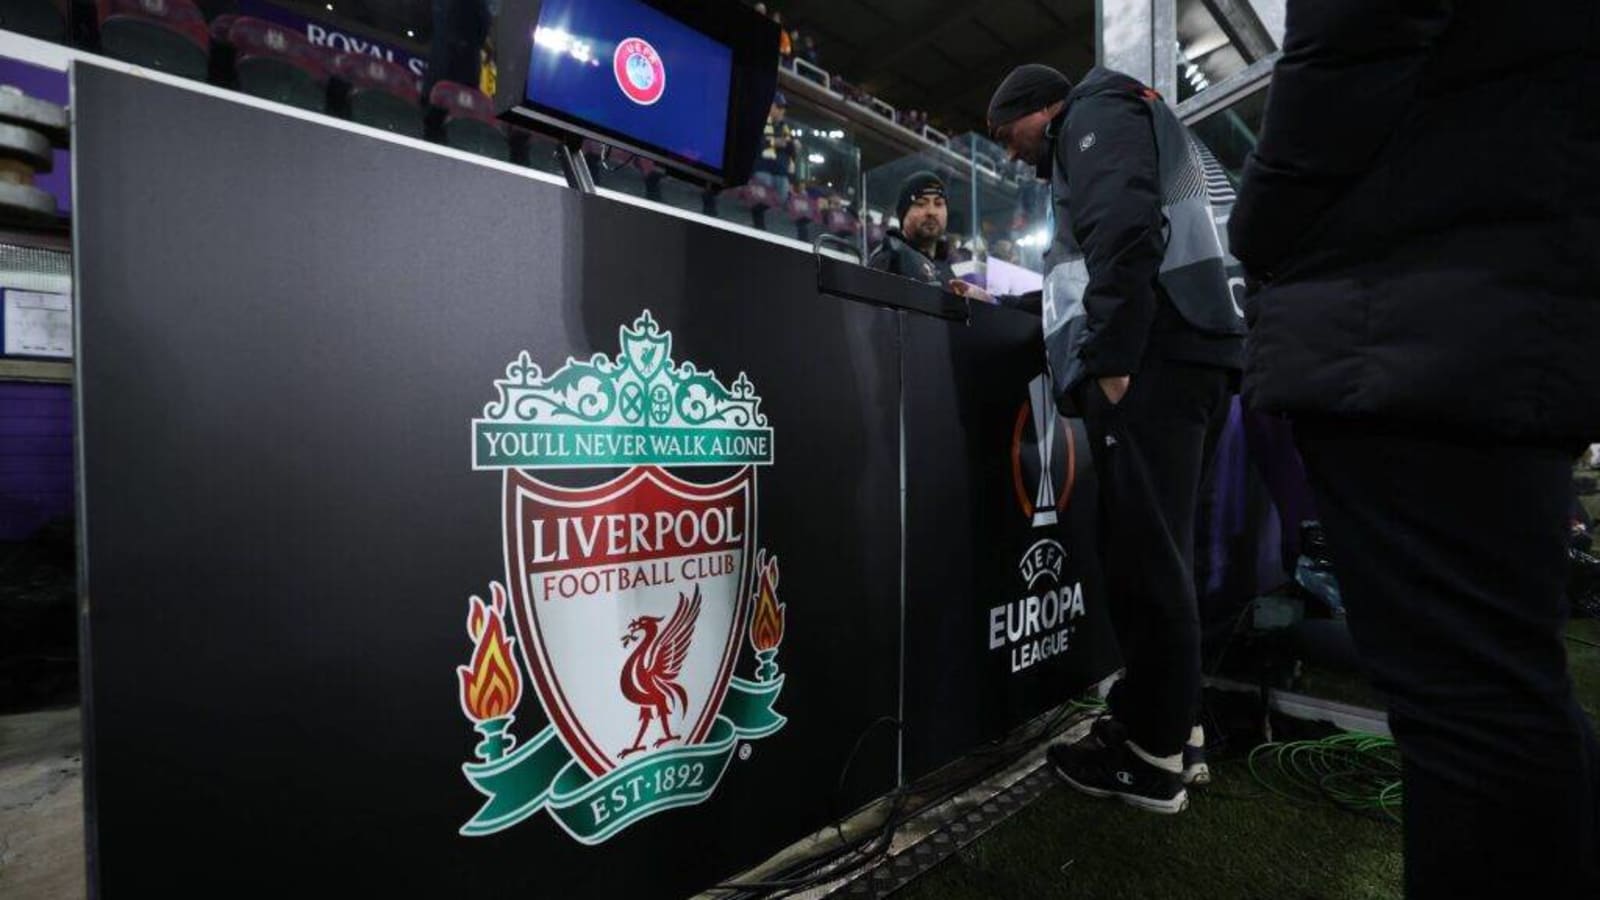 ‘Here We Go’: Liverpool Set to Appoint ‘Tactical Vanguard’ Manager in €15m Transfer